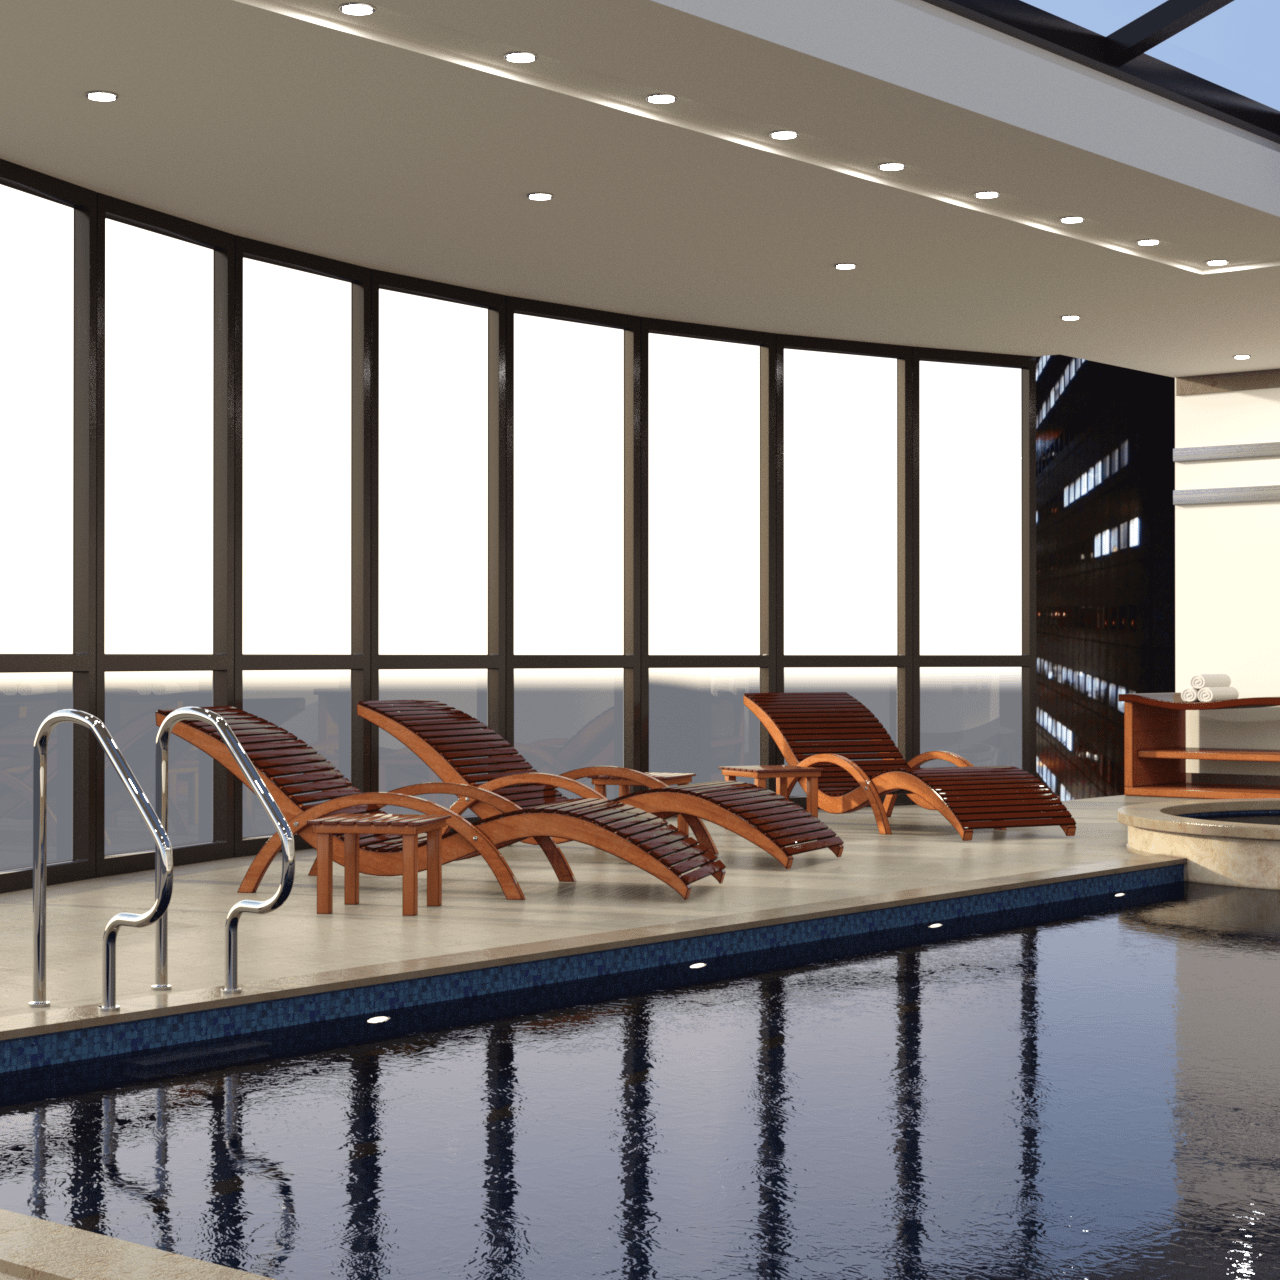 Rendering of the seat area next to the swimming pool